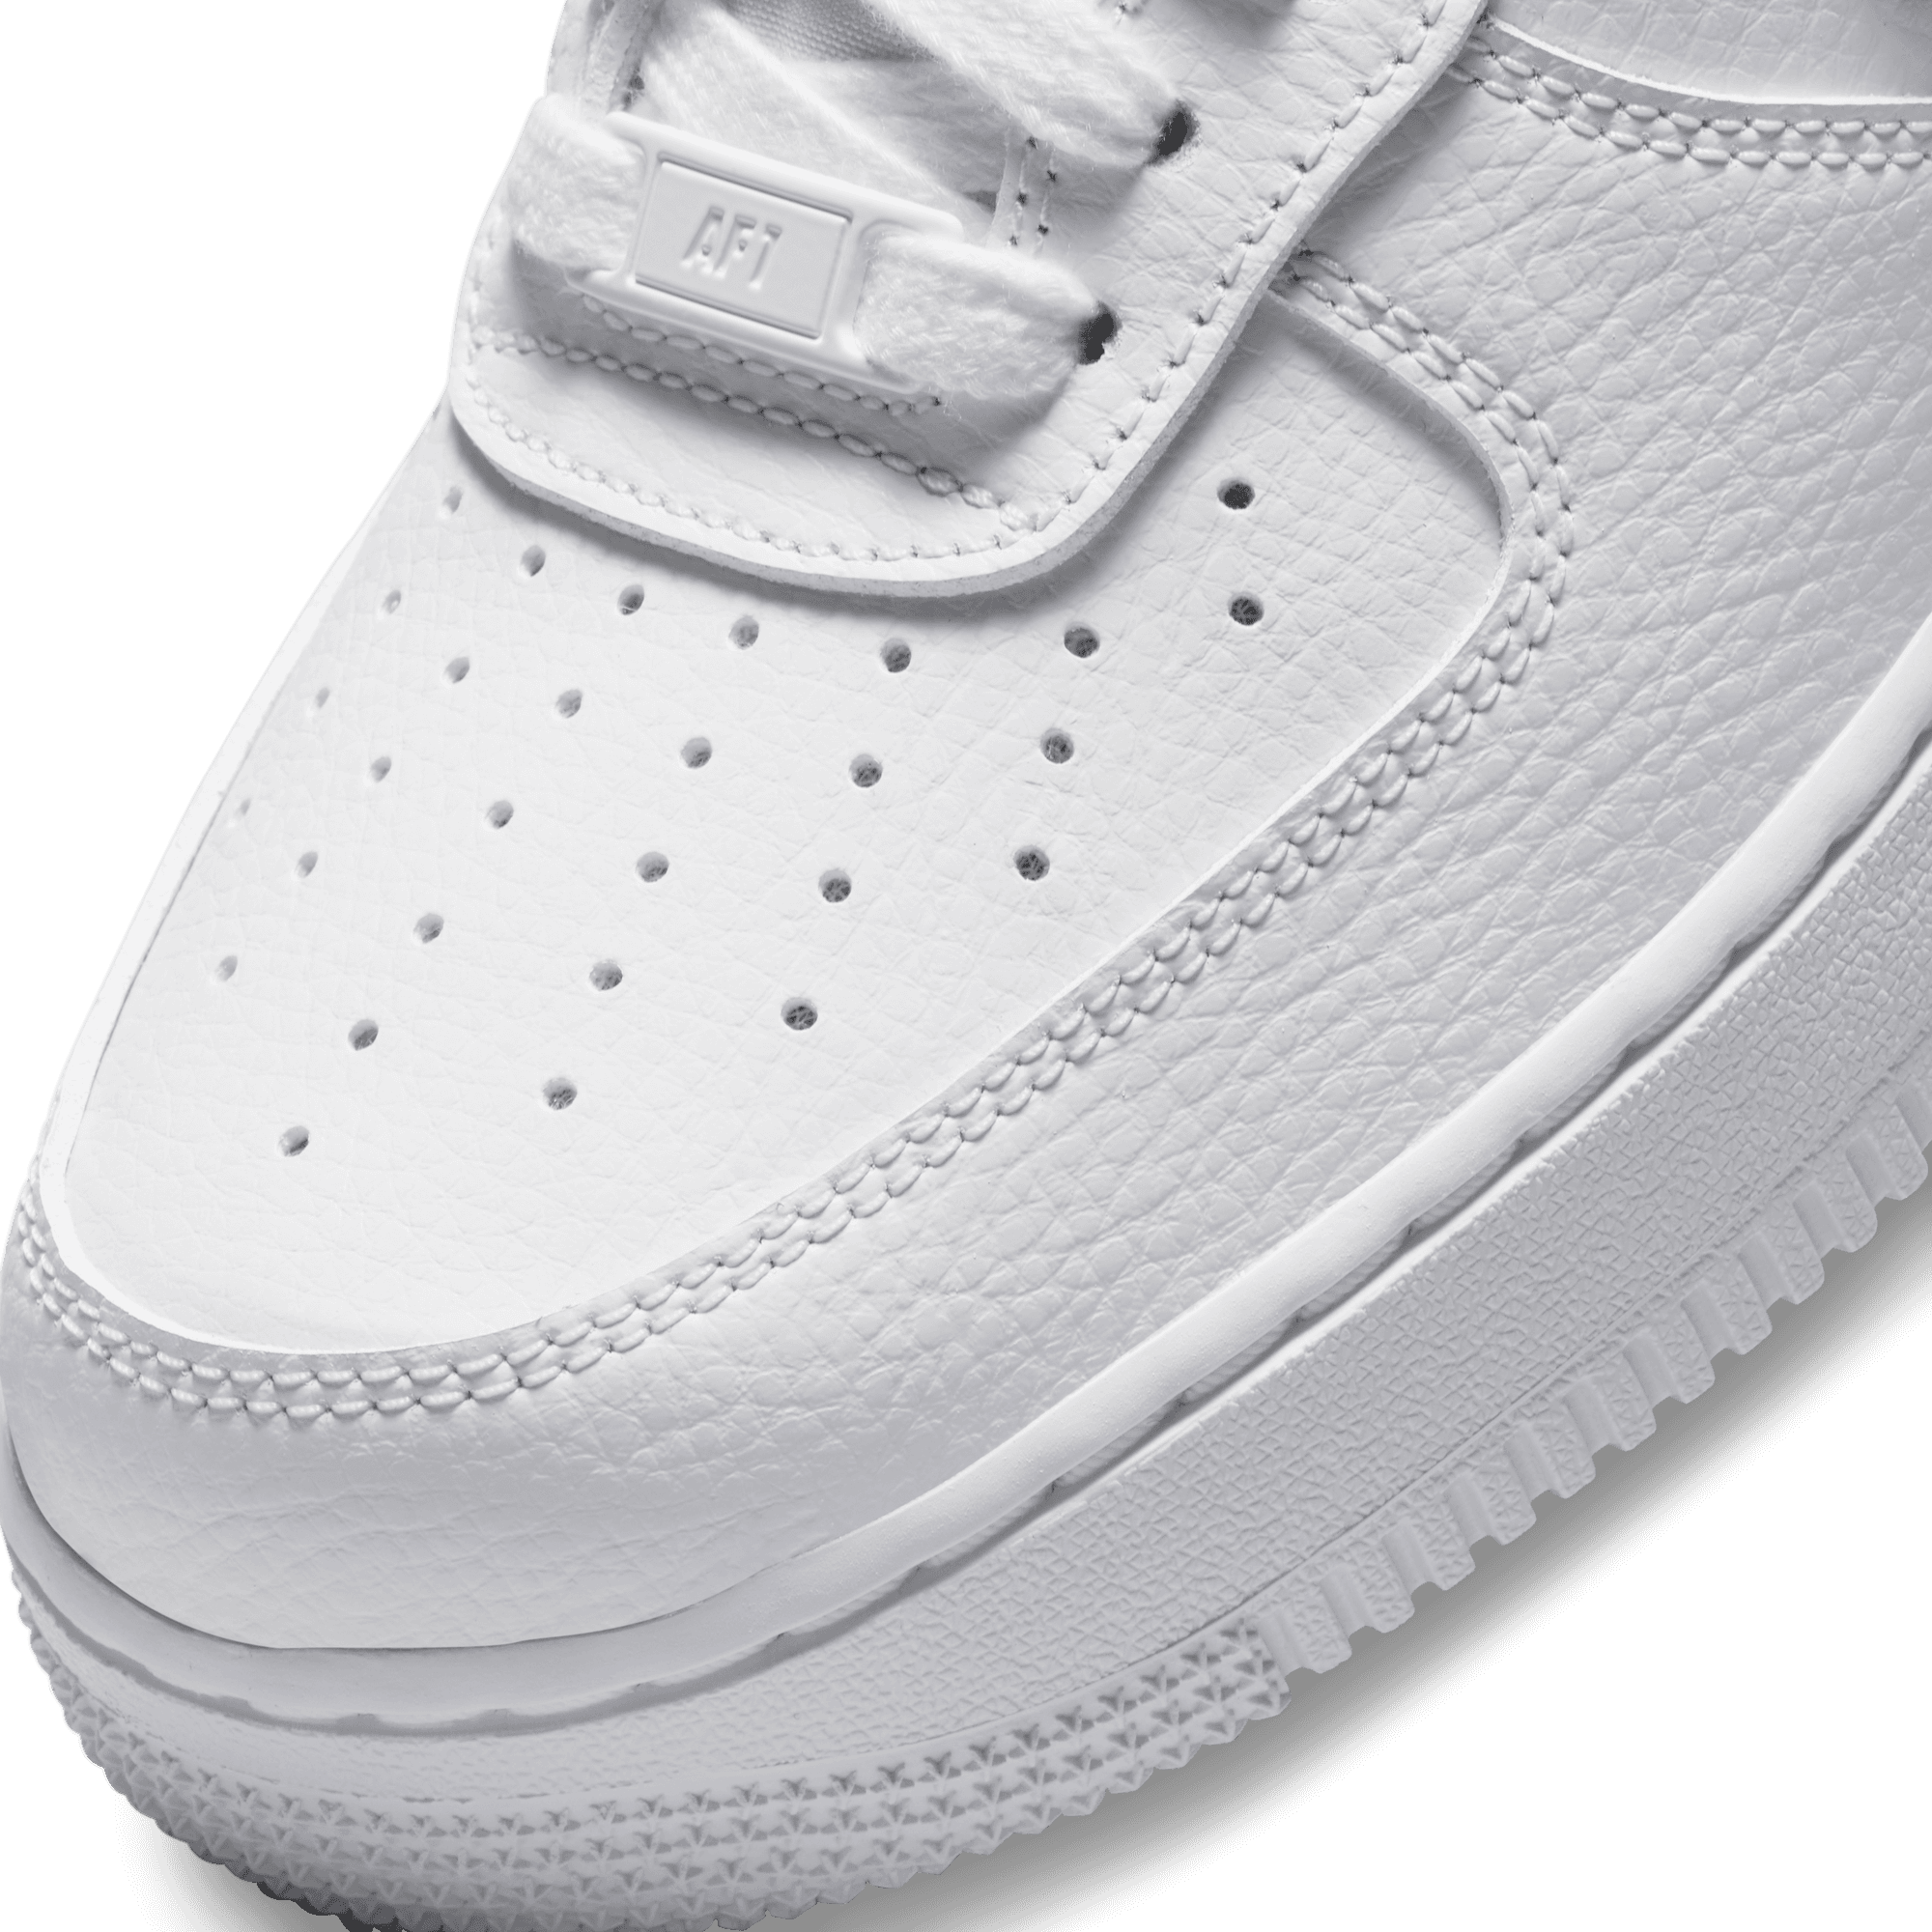 Nike Air Force 1 '07 Essential - Women's - GBNY